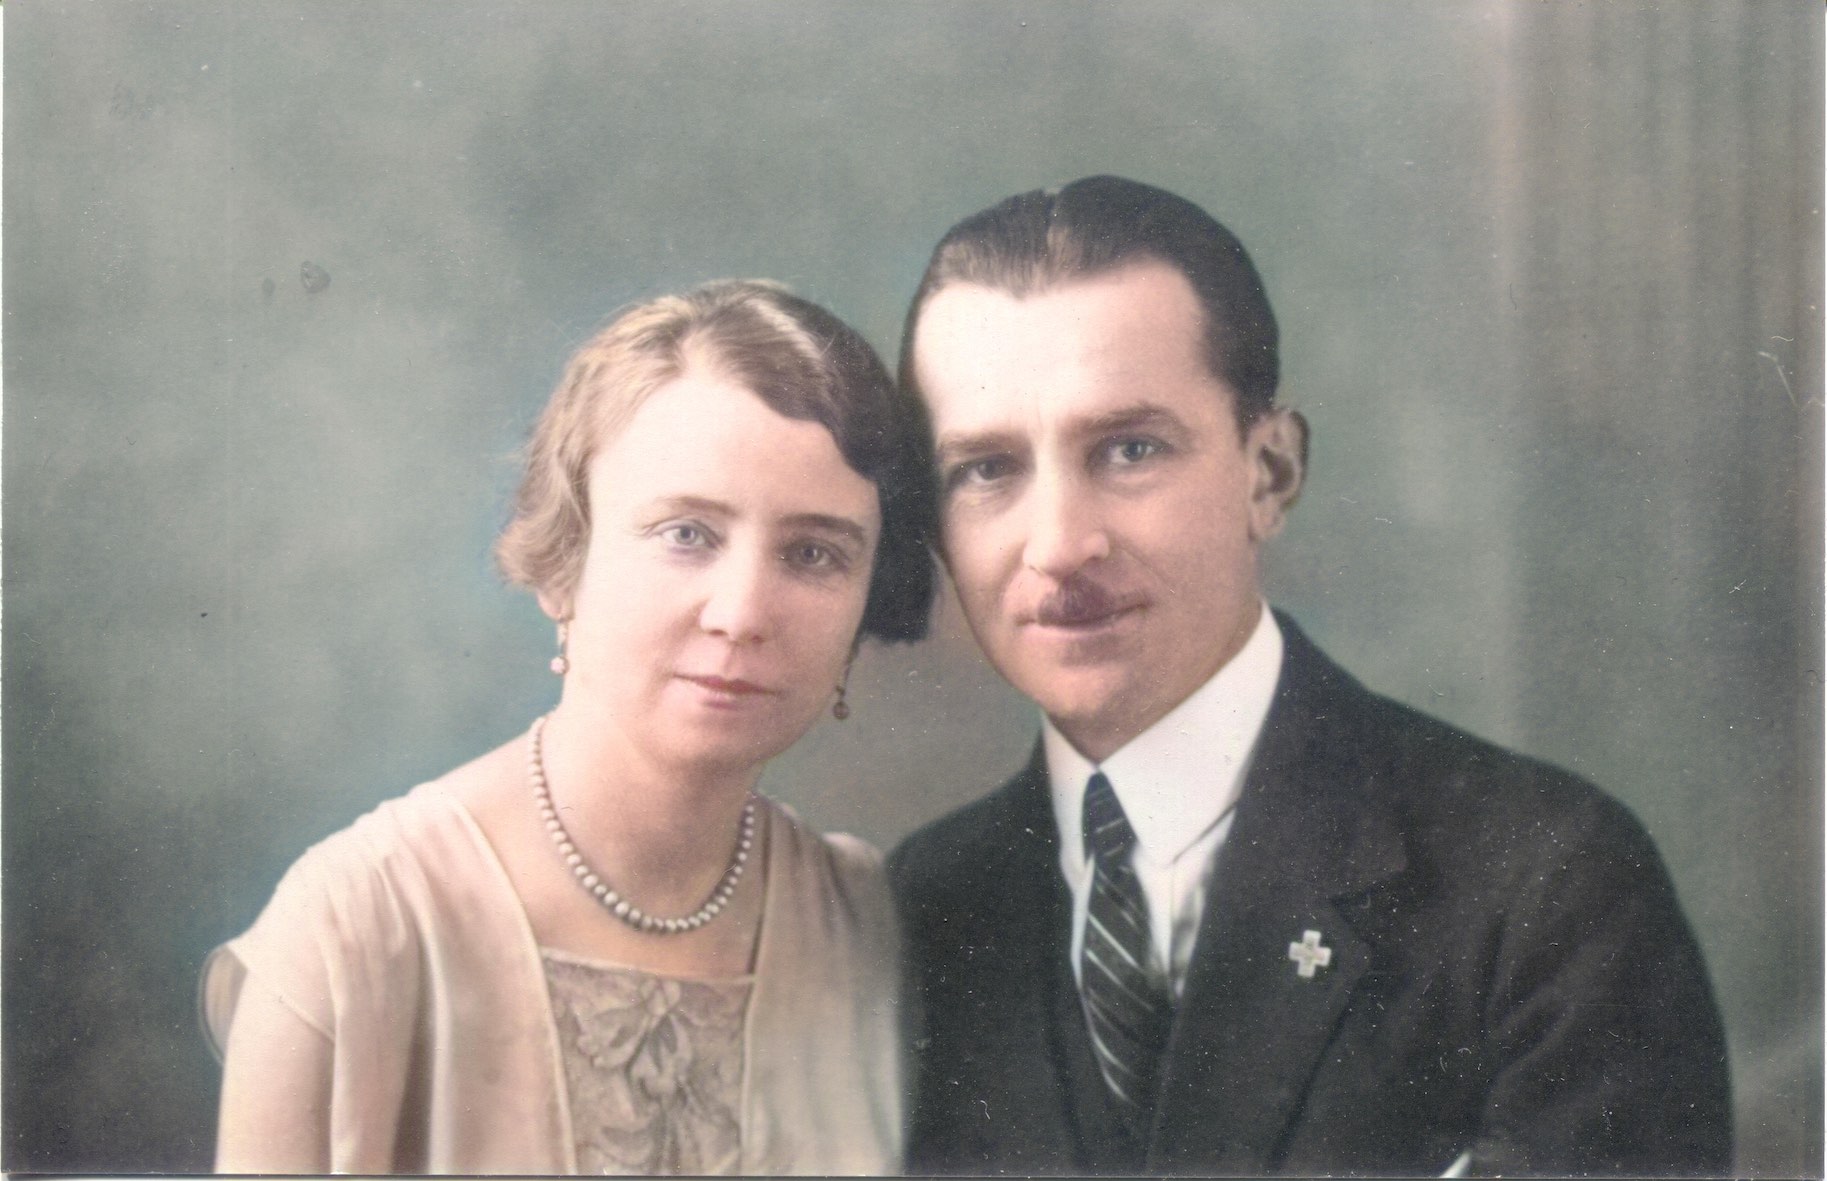 Lolly and Valentine in 1927